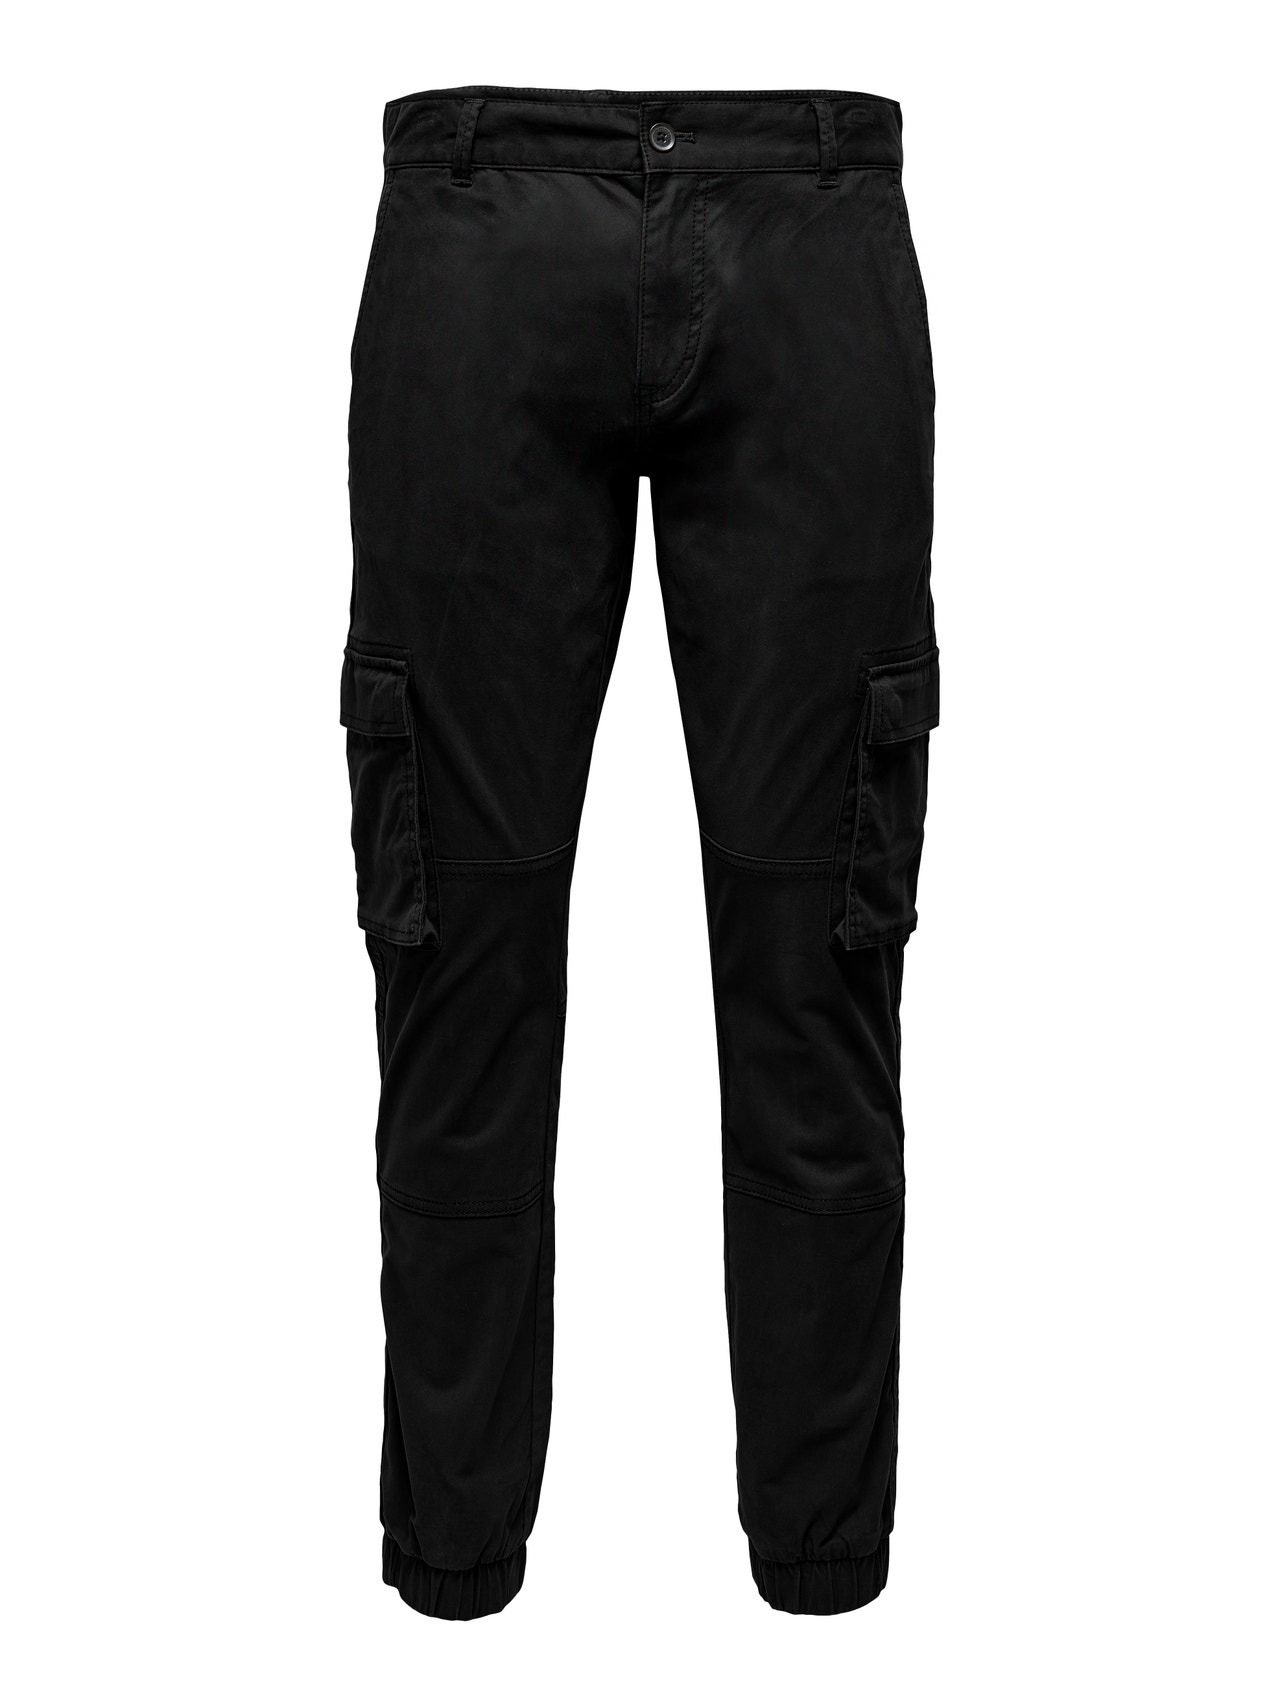 Cargo trousers | Black | ONLY & SONS®